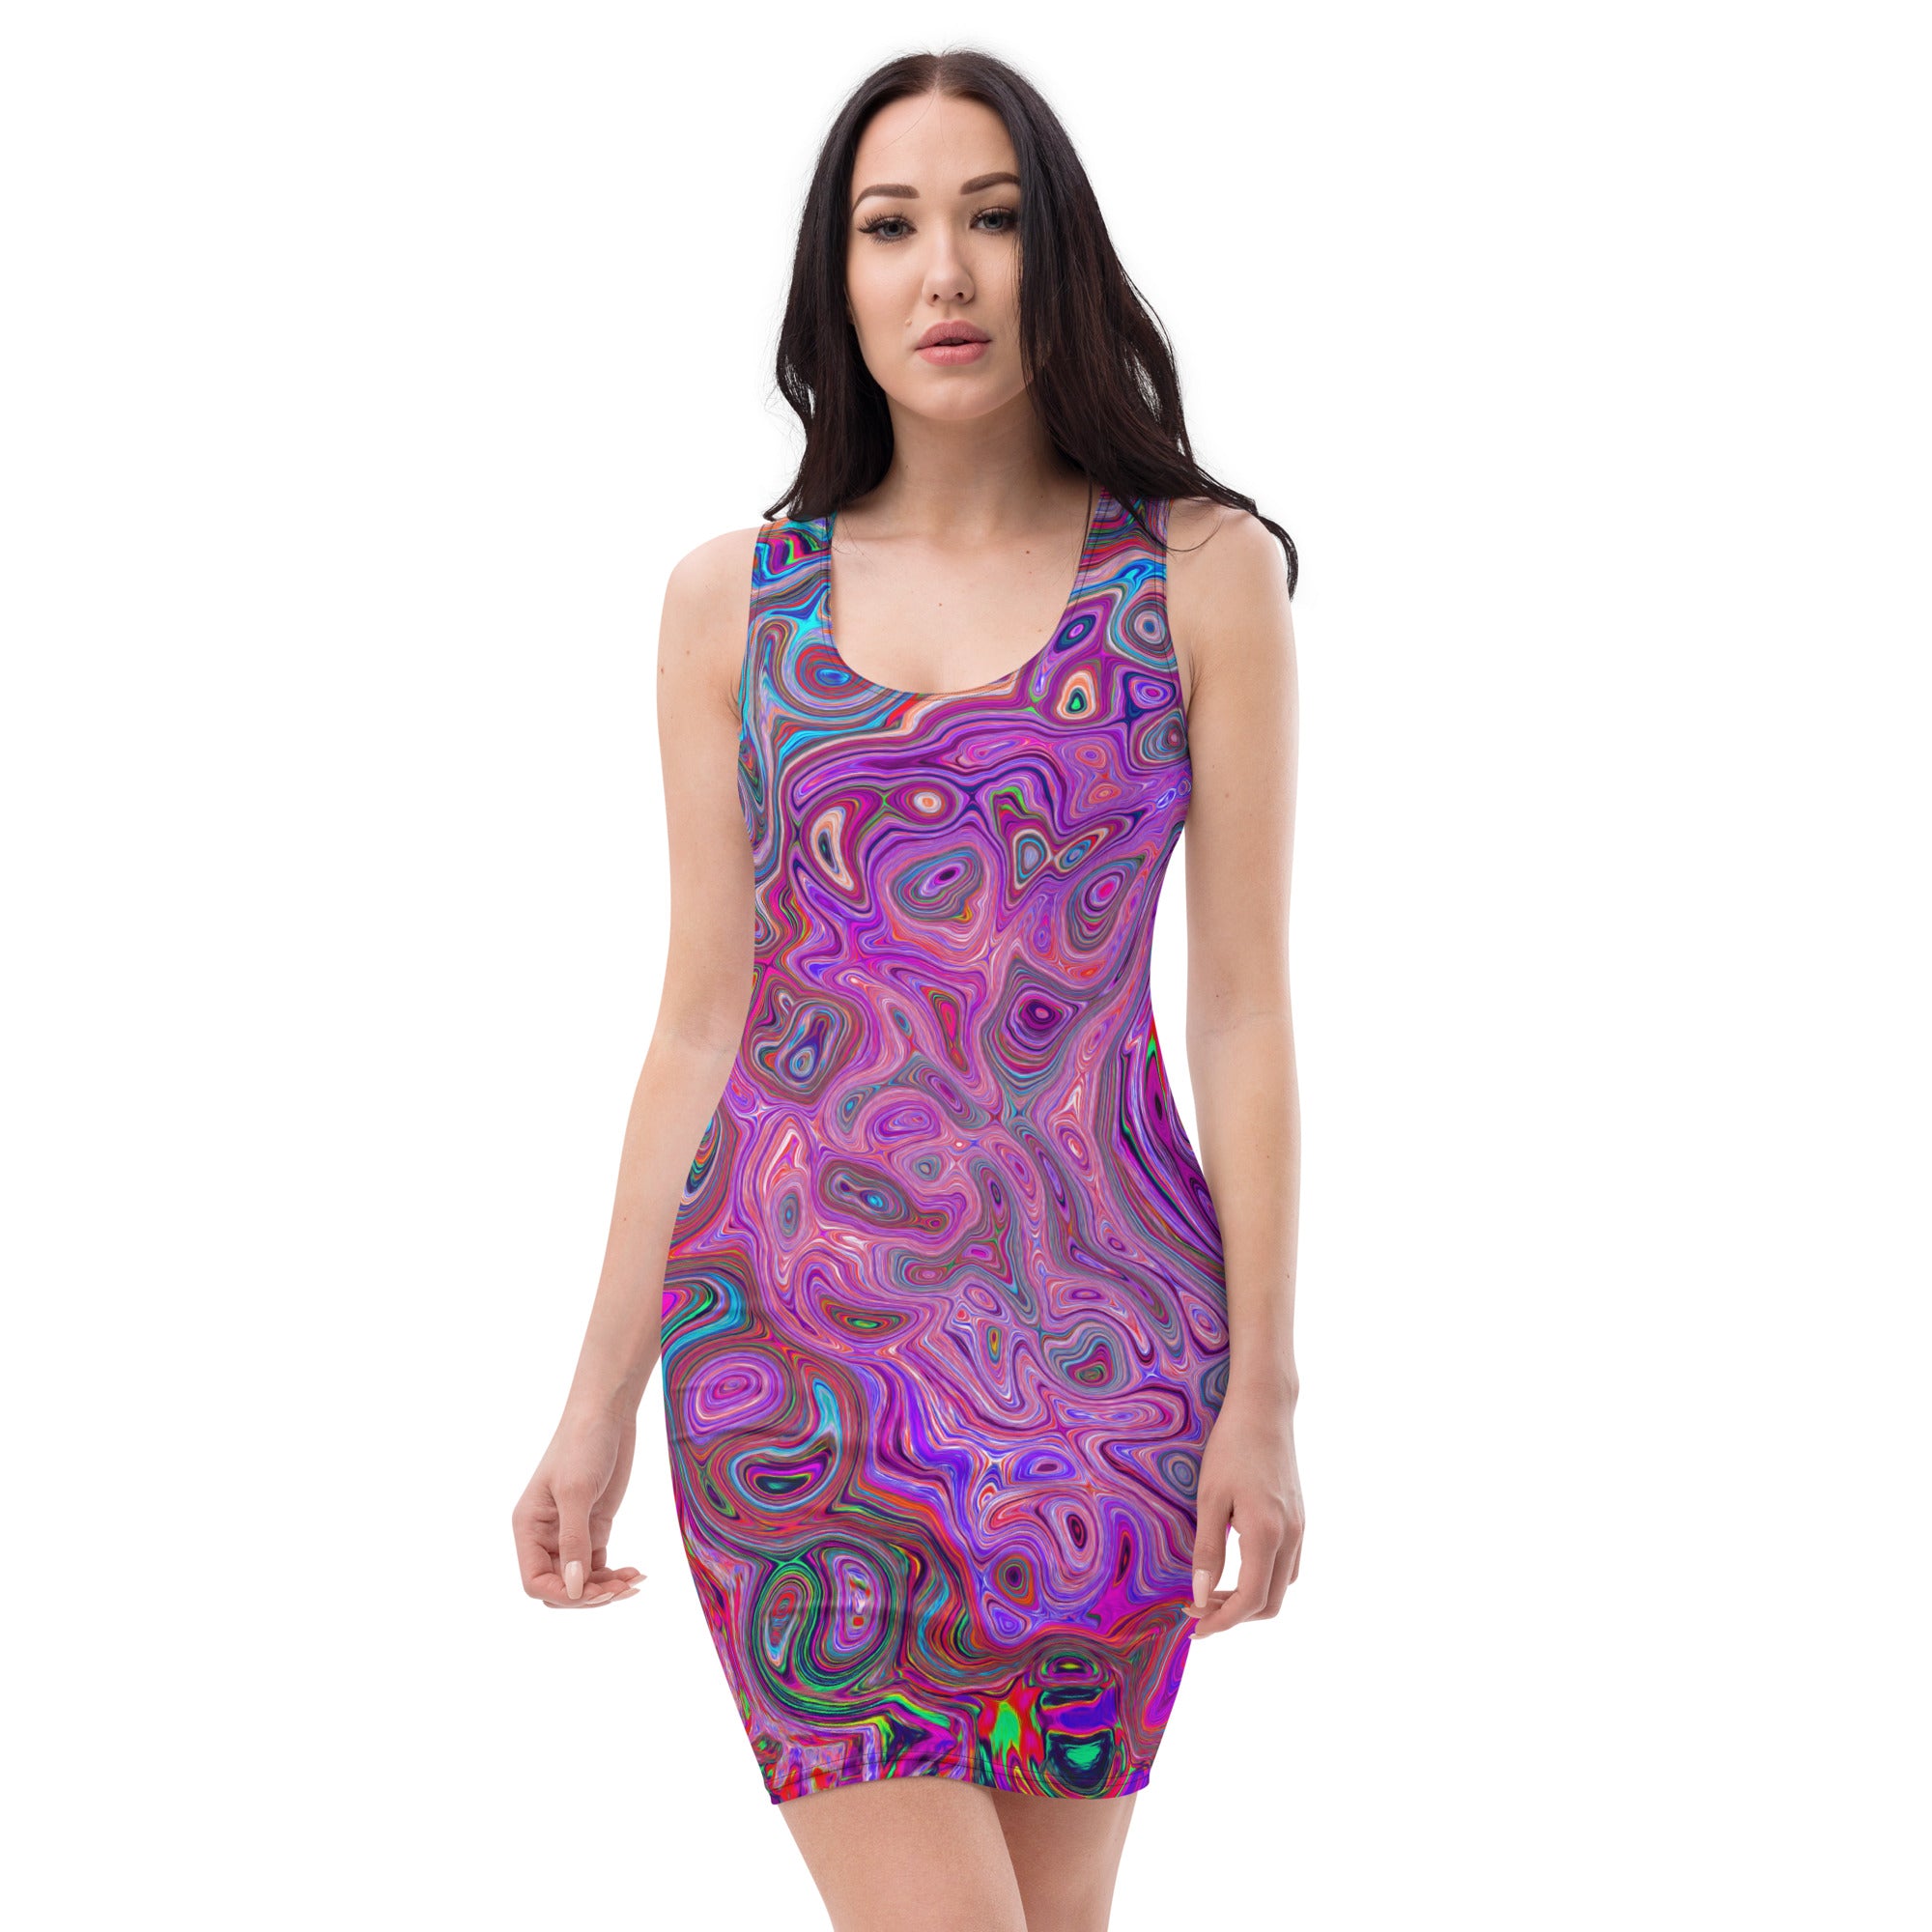 Bodycon Dress, Purple, Blue and Red Abstract Retro Swirl